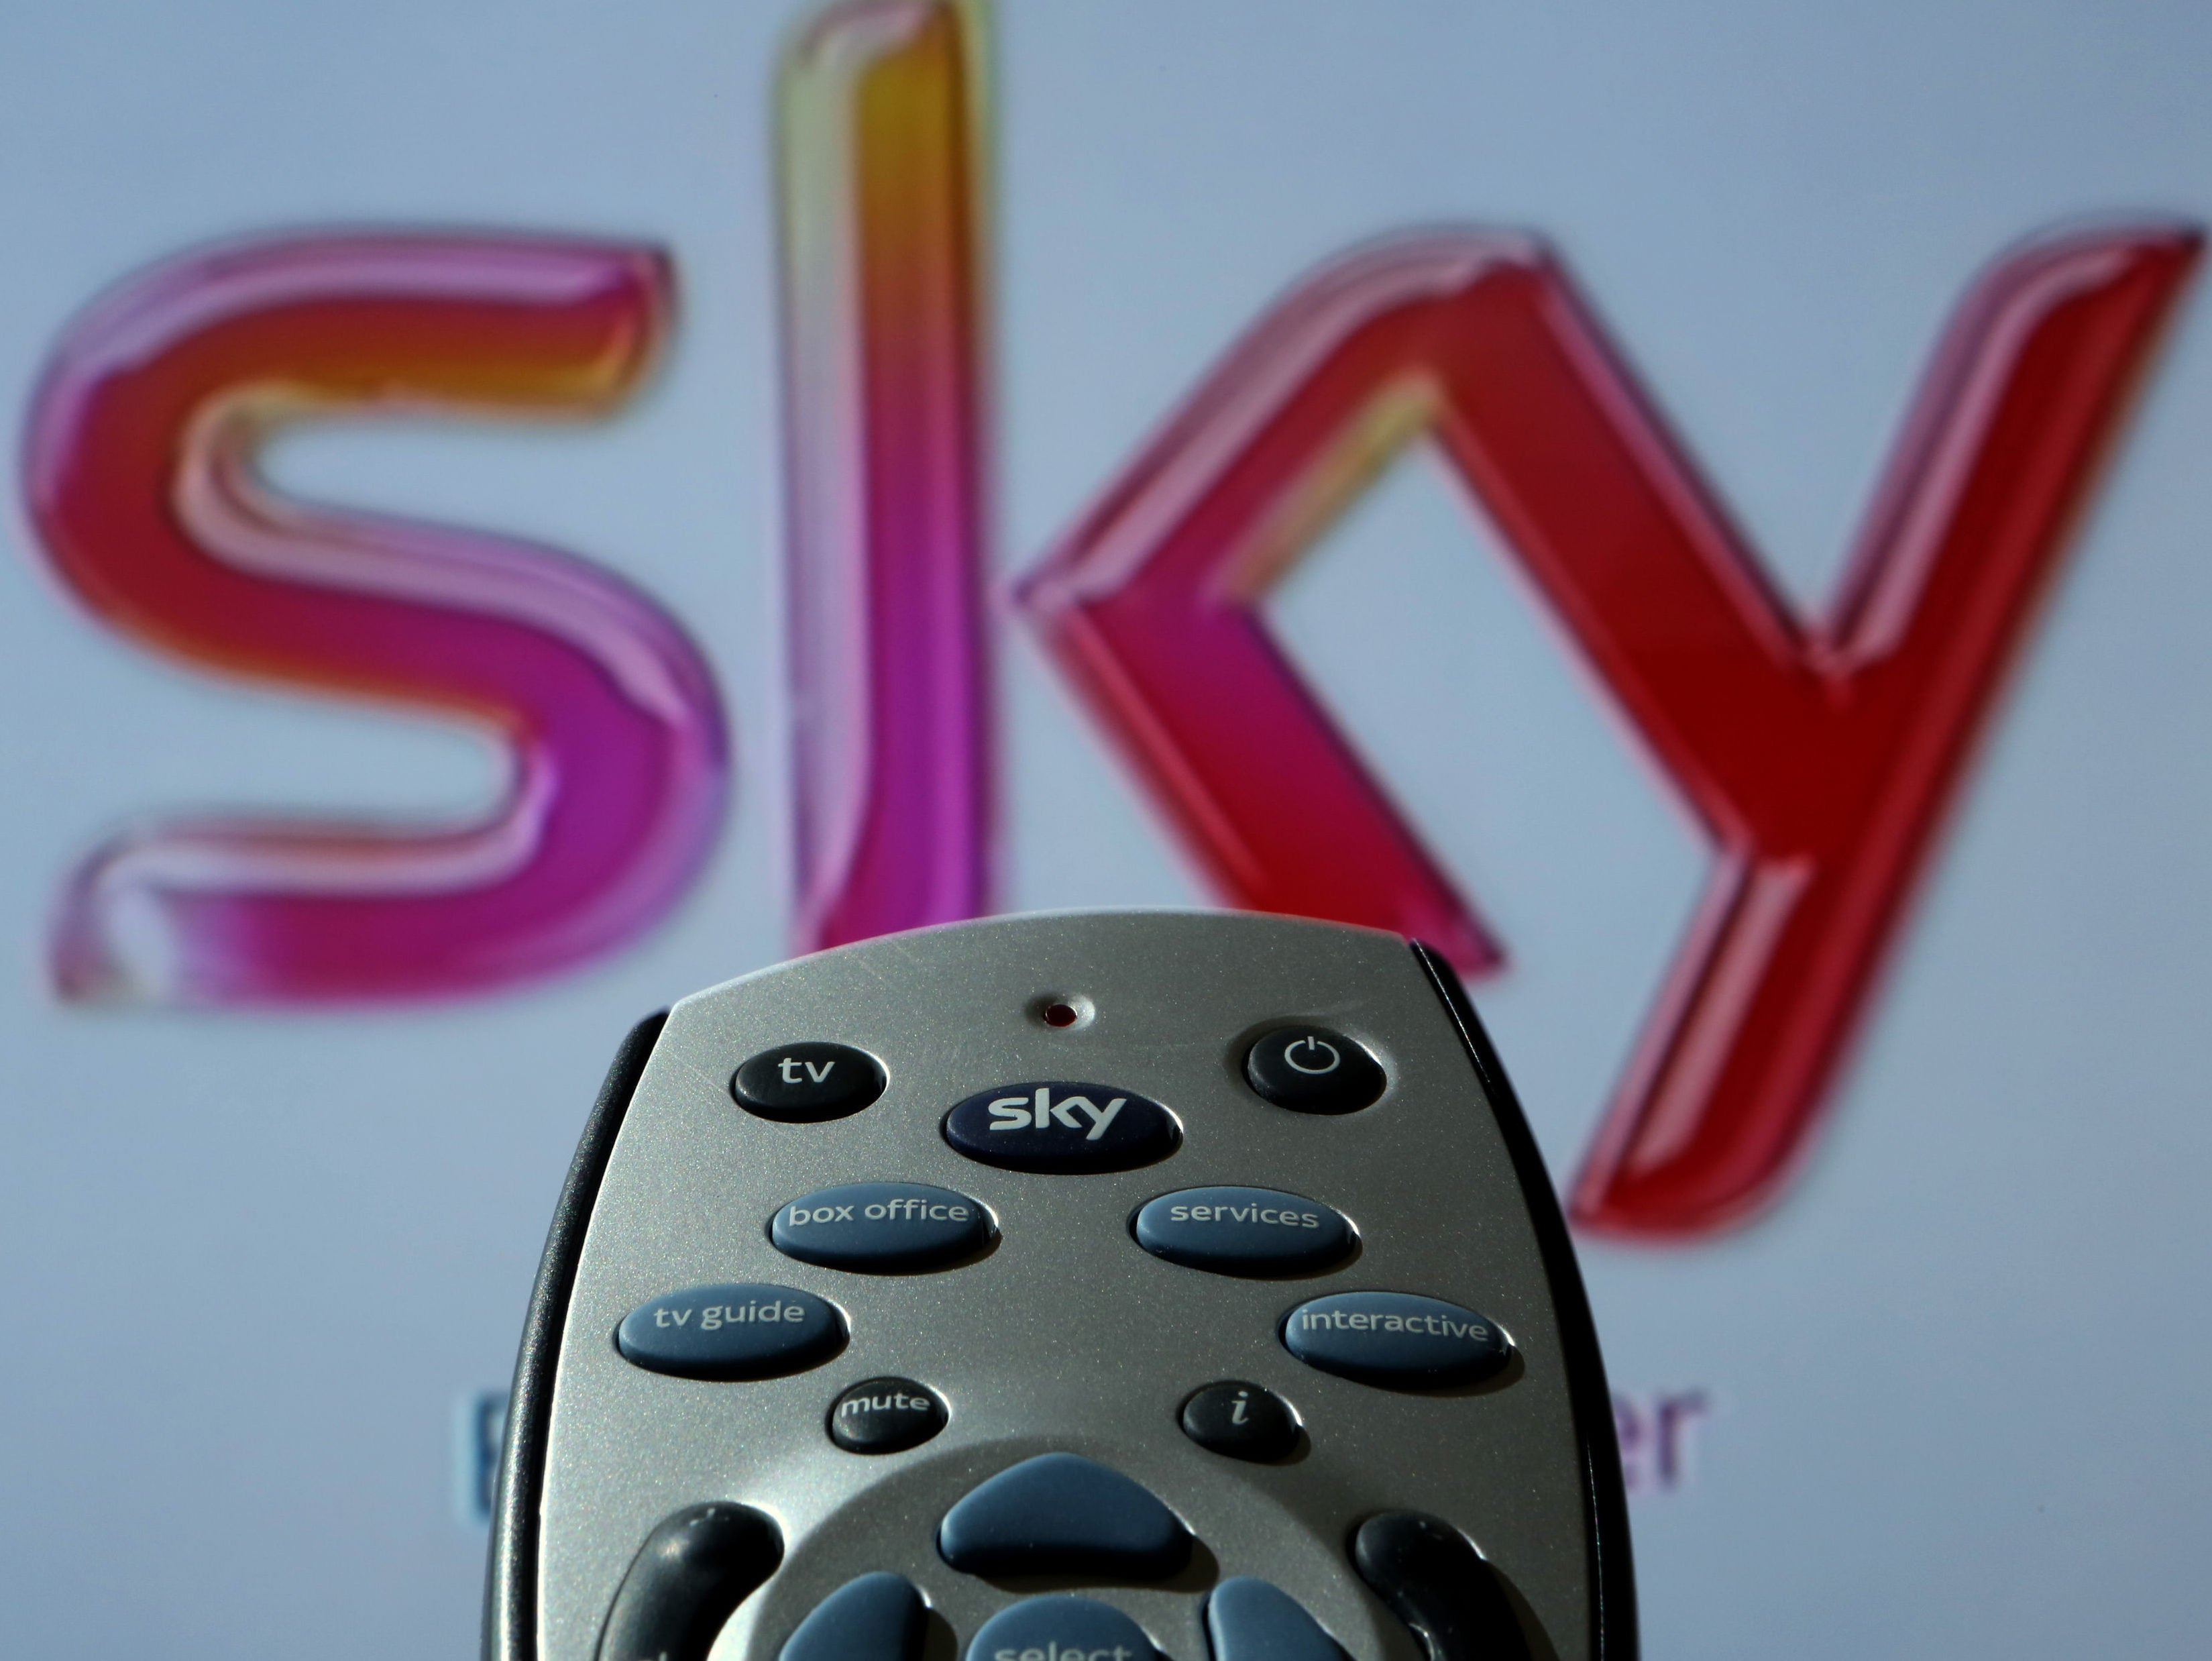 Comcast agrees to buy Fox's stake in Sky for £11.6bn after bidding war victory